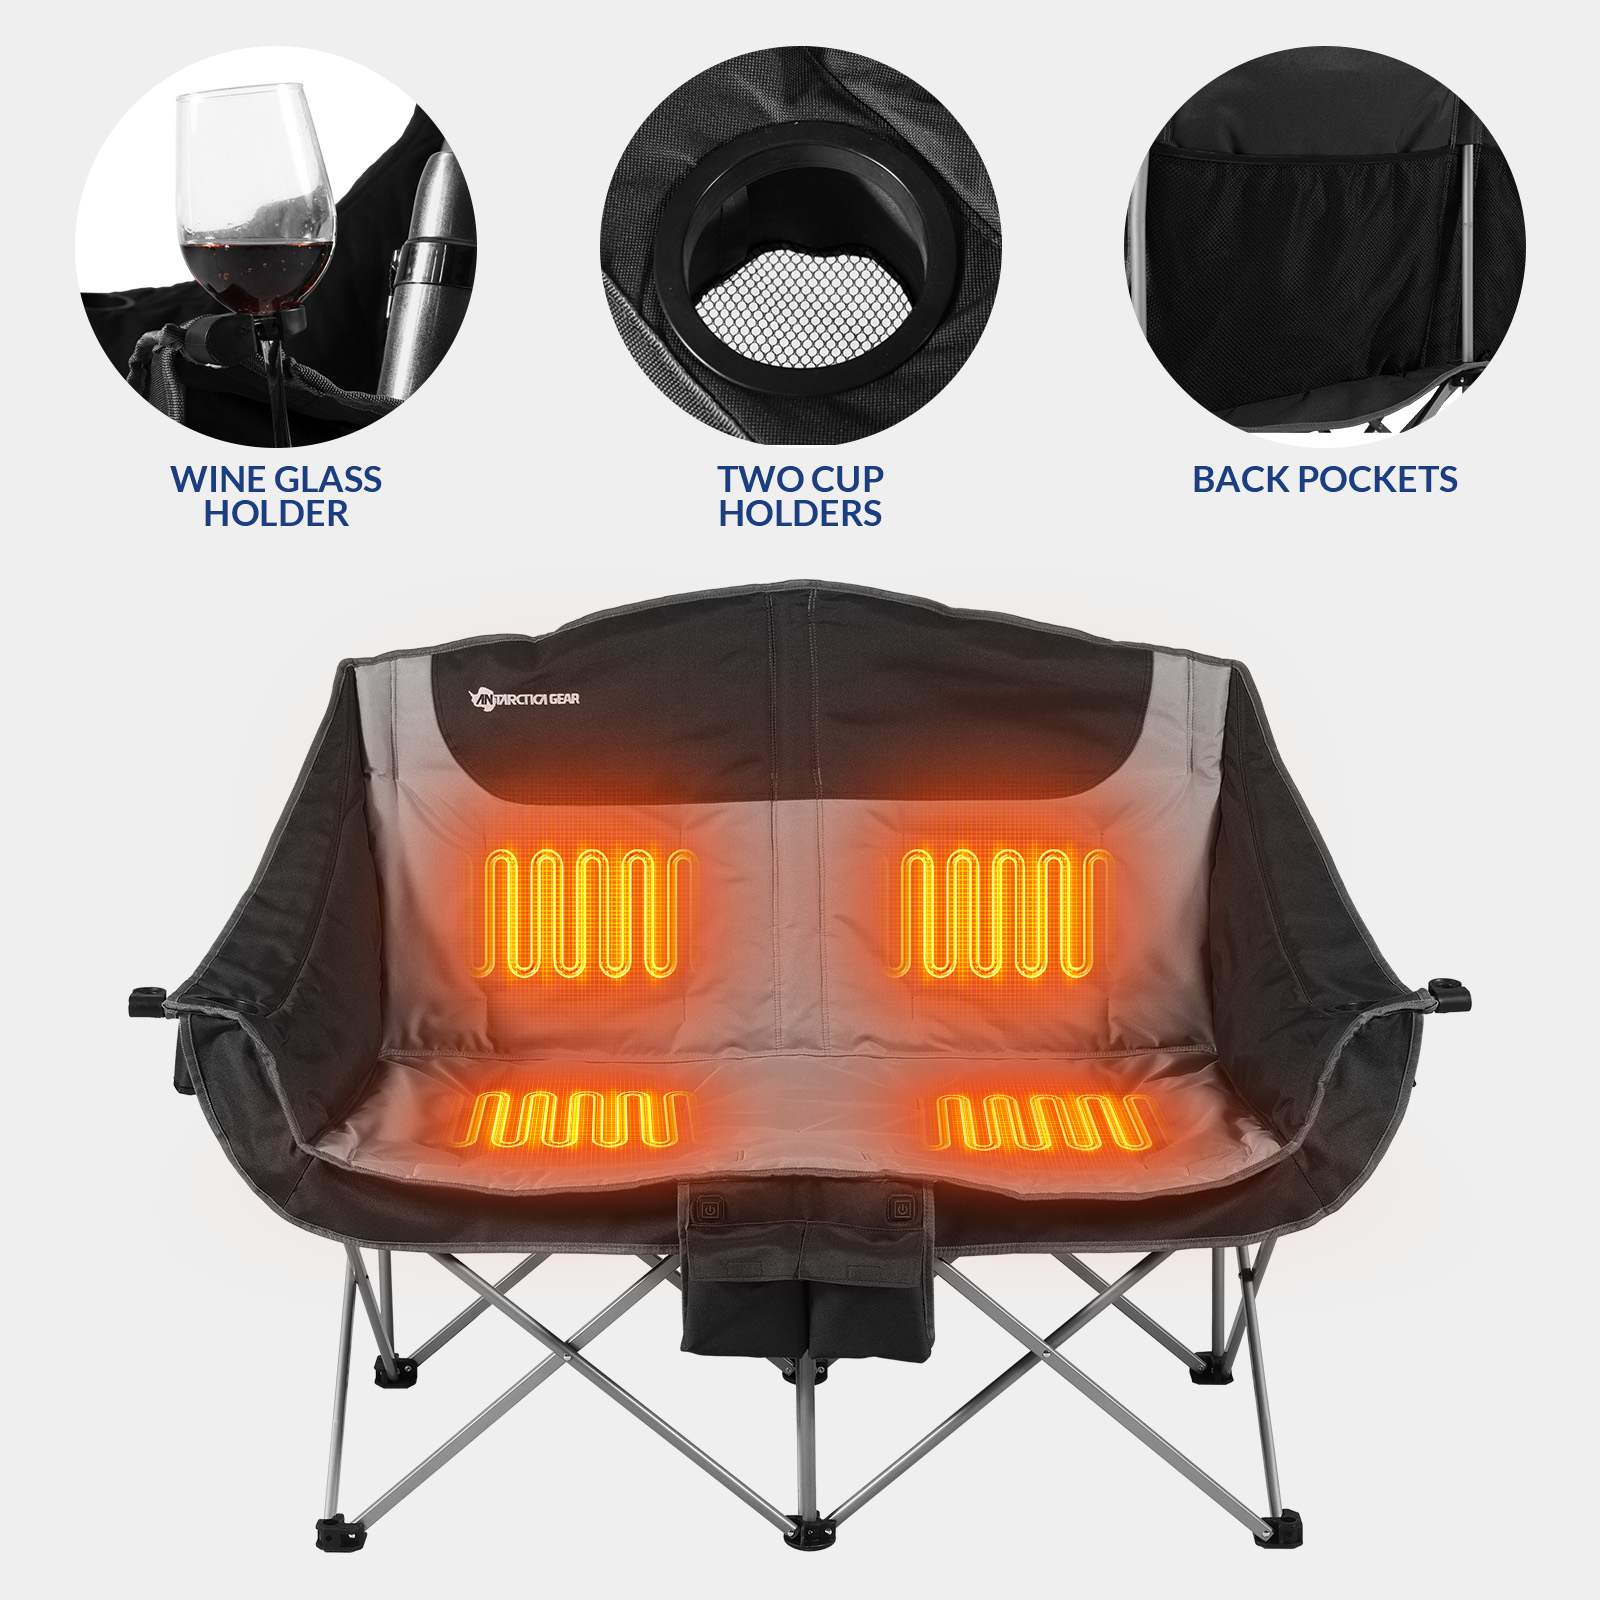 ANTARCTICA GEAR Heated Double Camping Chair, 2-Person Folding Chair Heated Portable Loveseat Chair